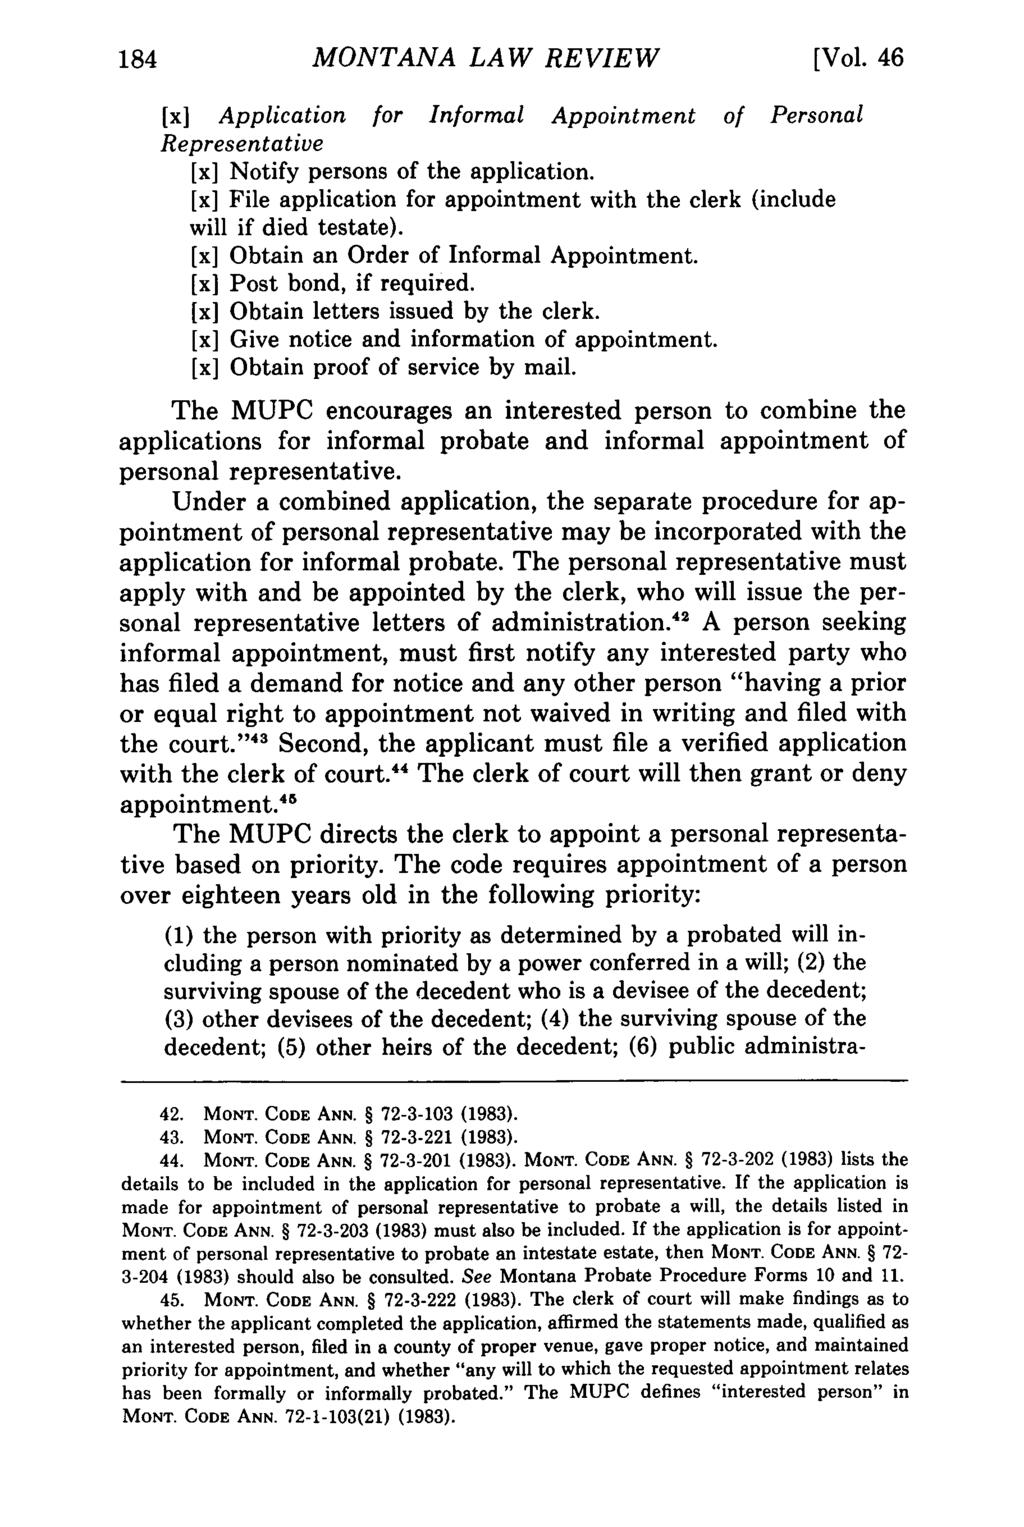 MONTANA Montana Law Review, LAW Vol. 46 REVIEW [1985], Iss. 1, Art. 8 [Vol. 46 [x] Application for Informal Appointment of Personal Representative [x] Notify persons of the application.